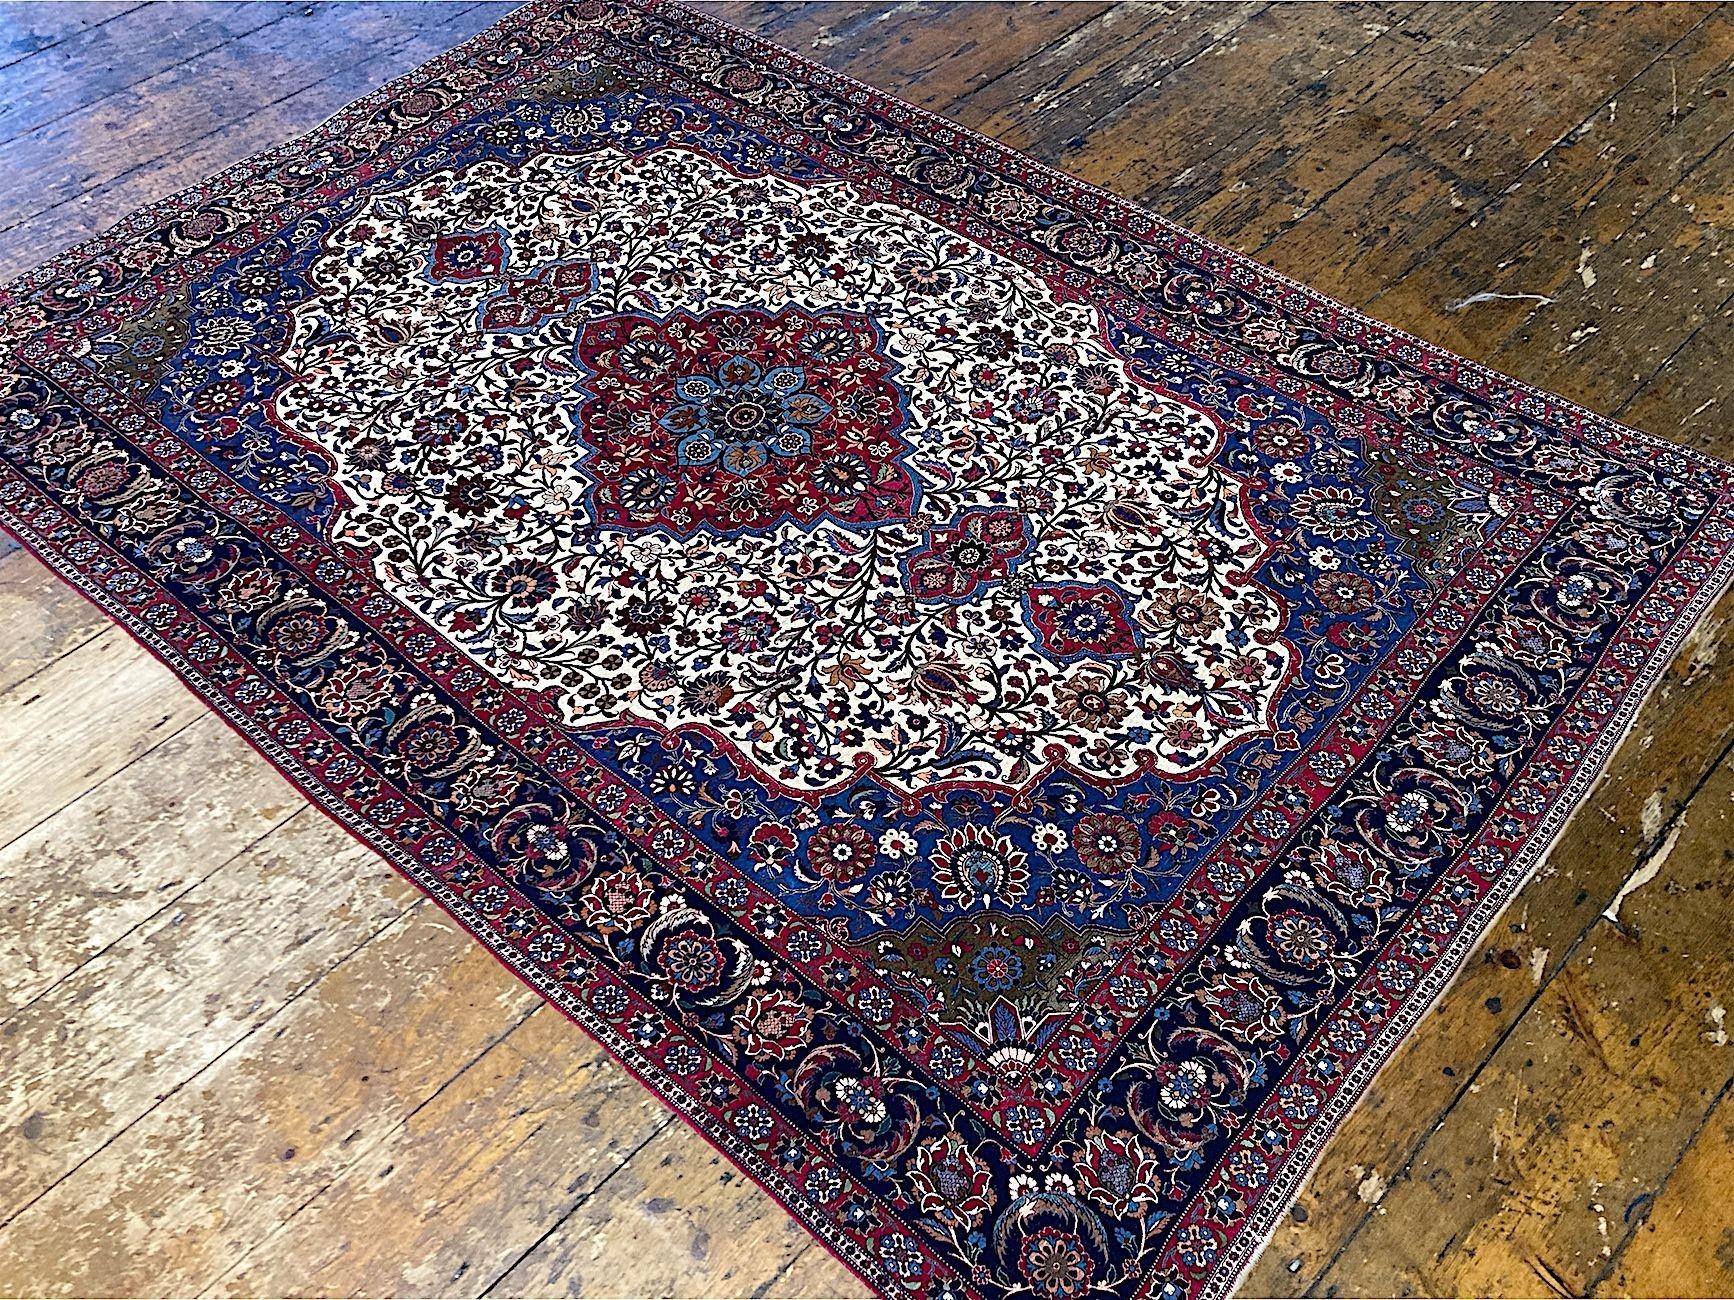 Antique Wool & Silk Isfahan Carpet 3.43m x 2.33m For Sale 2